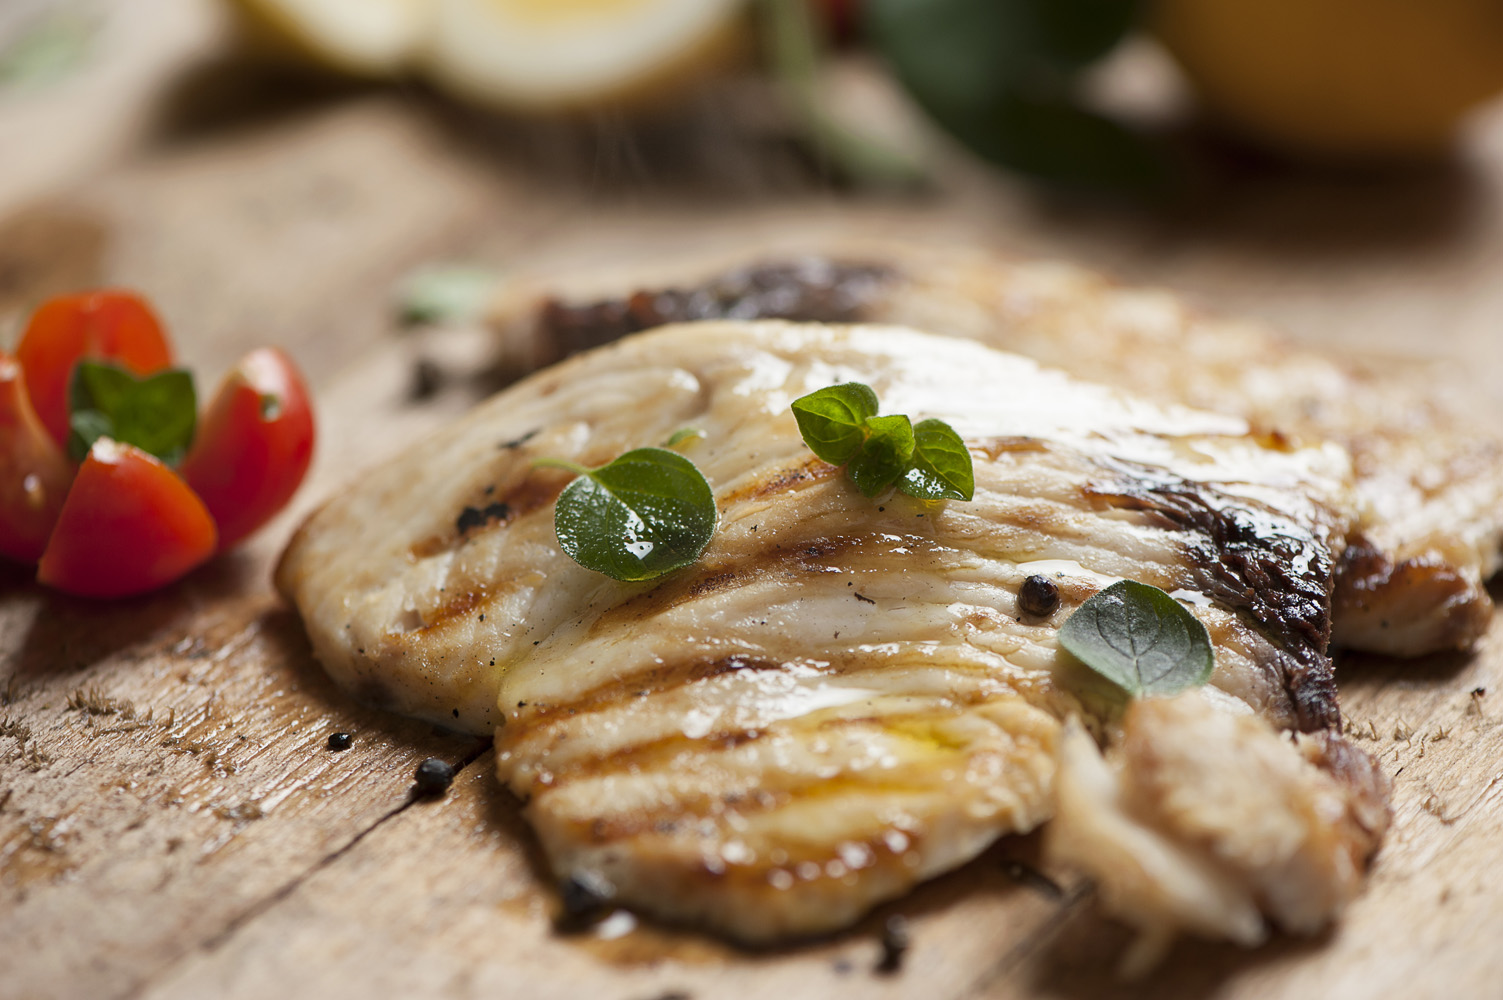 Dandenong Market — Grilled swordfish with fresh mango and red onion salsa